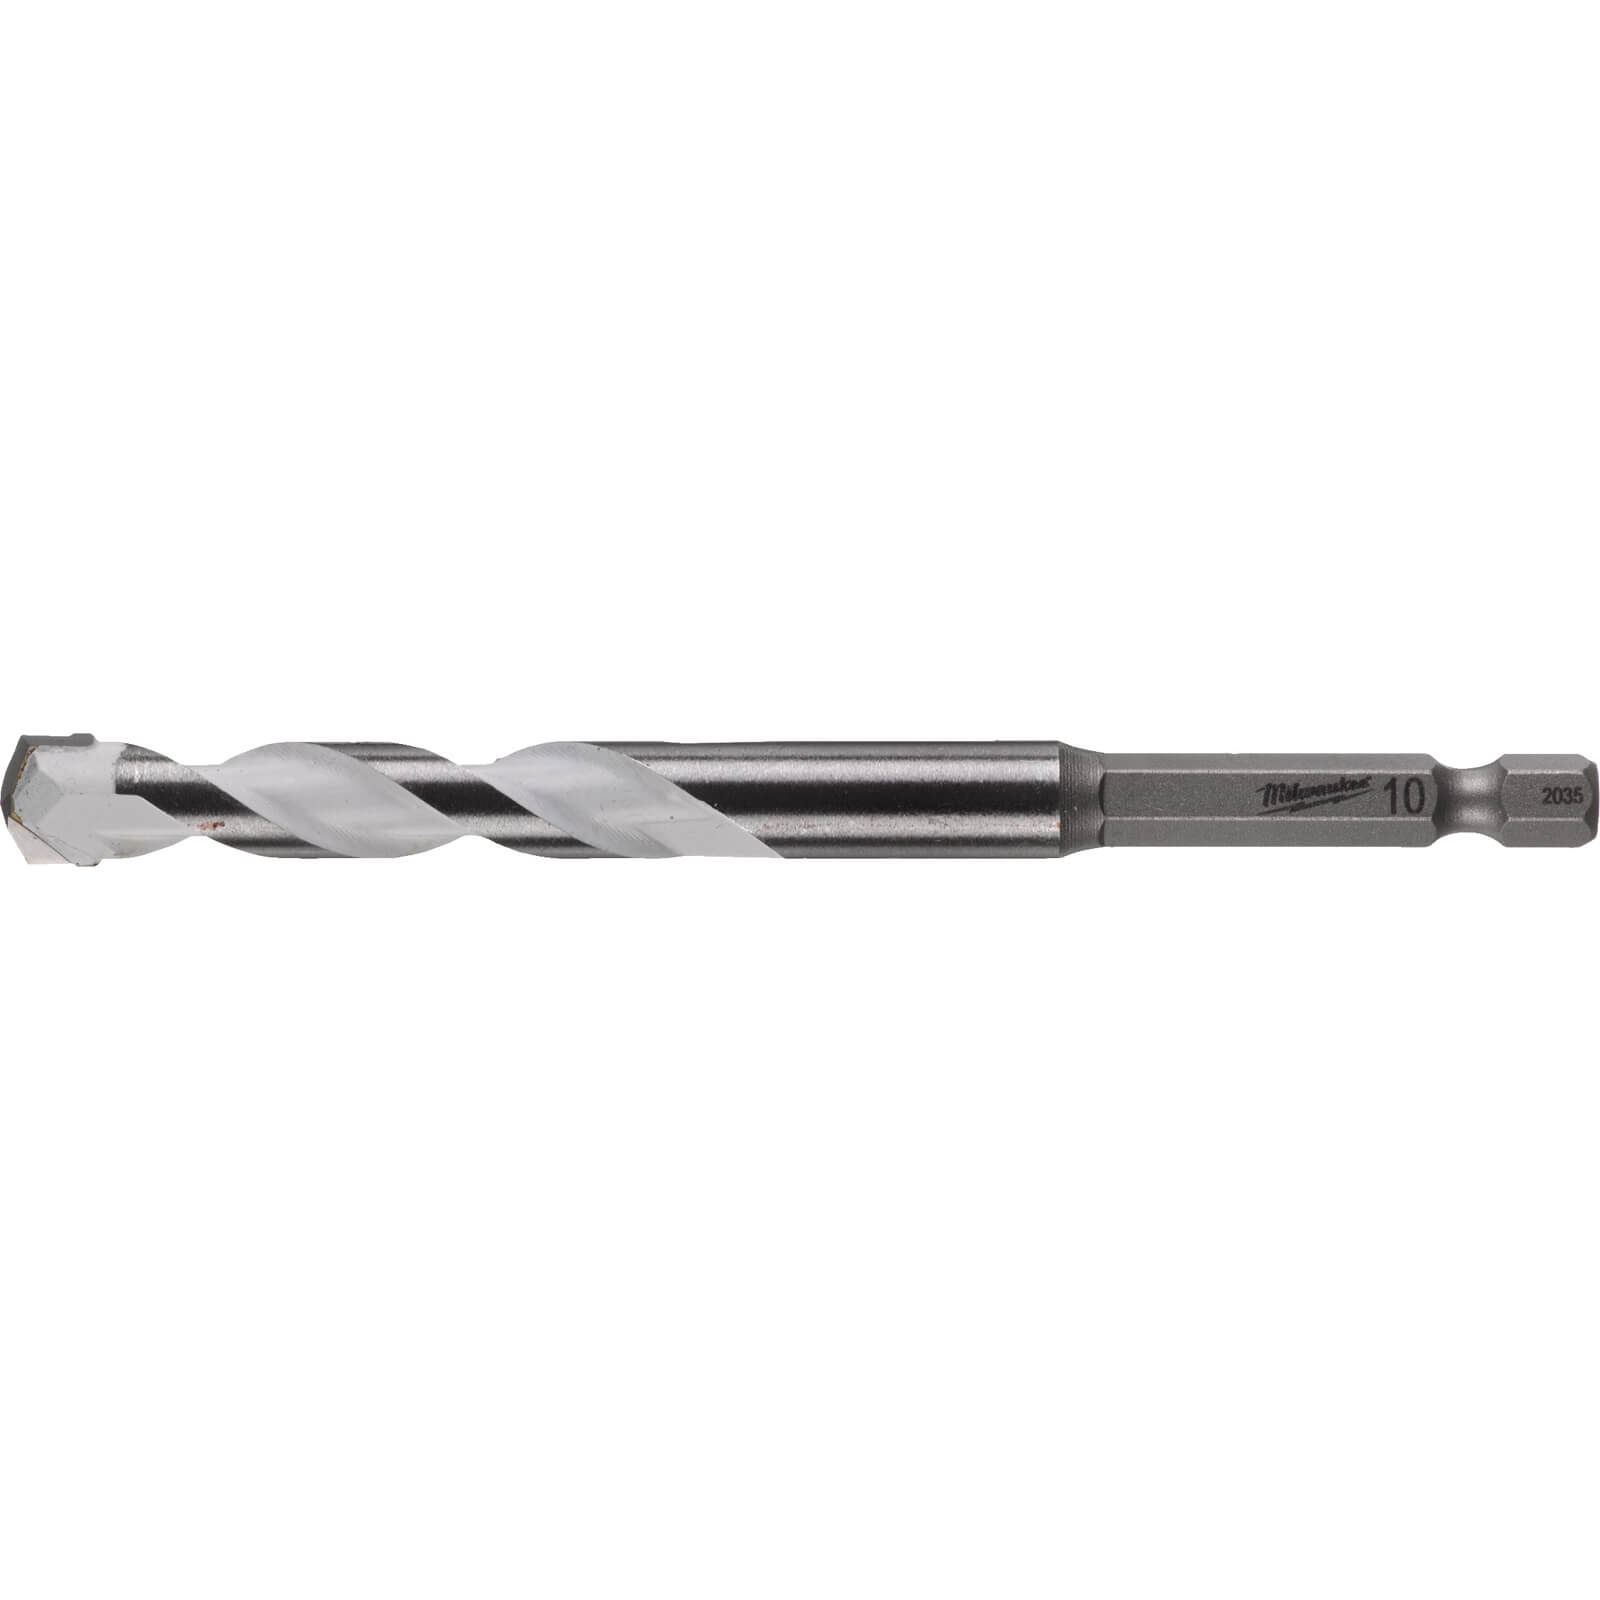 Photos - Drill Bit Milwaukee Multi Material Drill 10mm 120mm Pack of 1 4932471107 